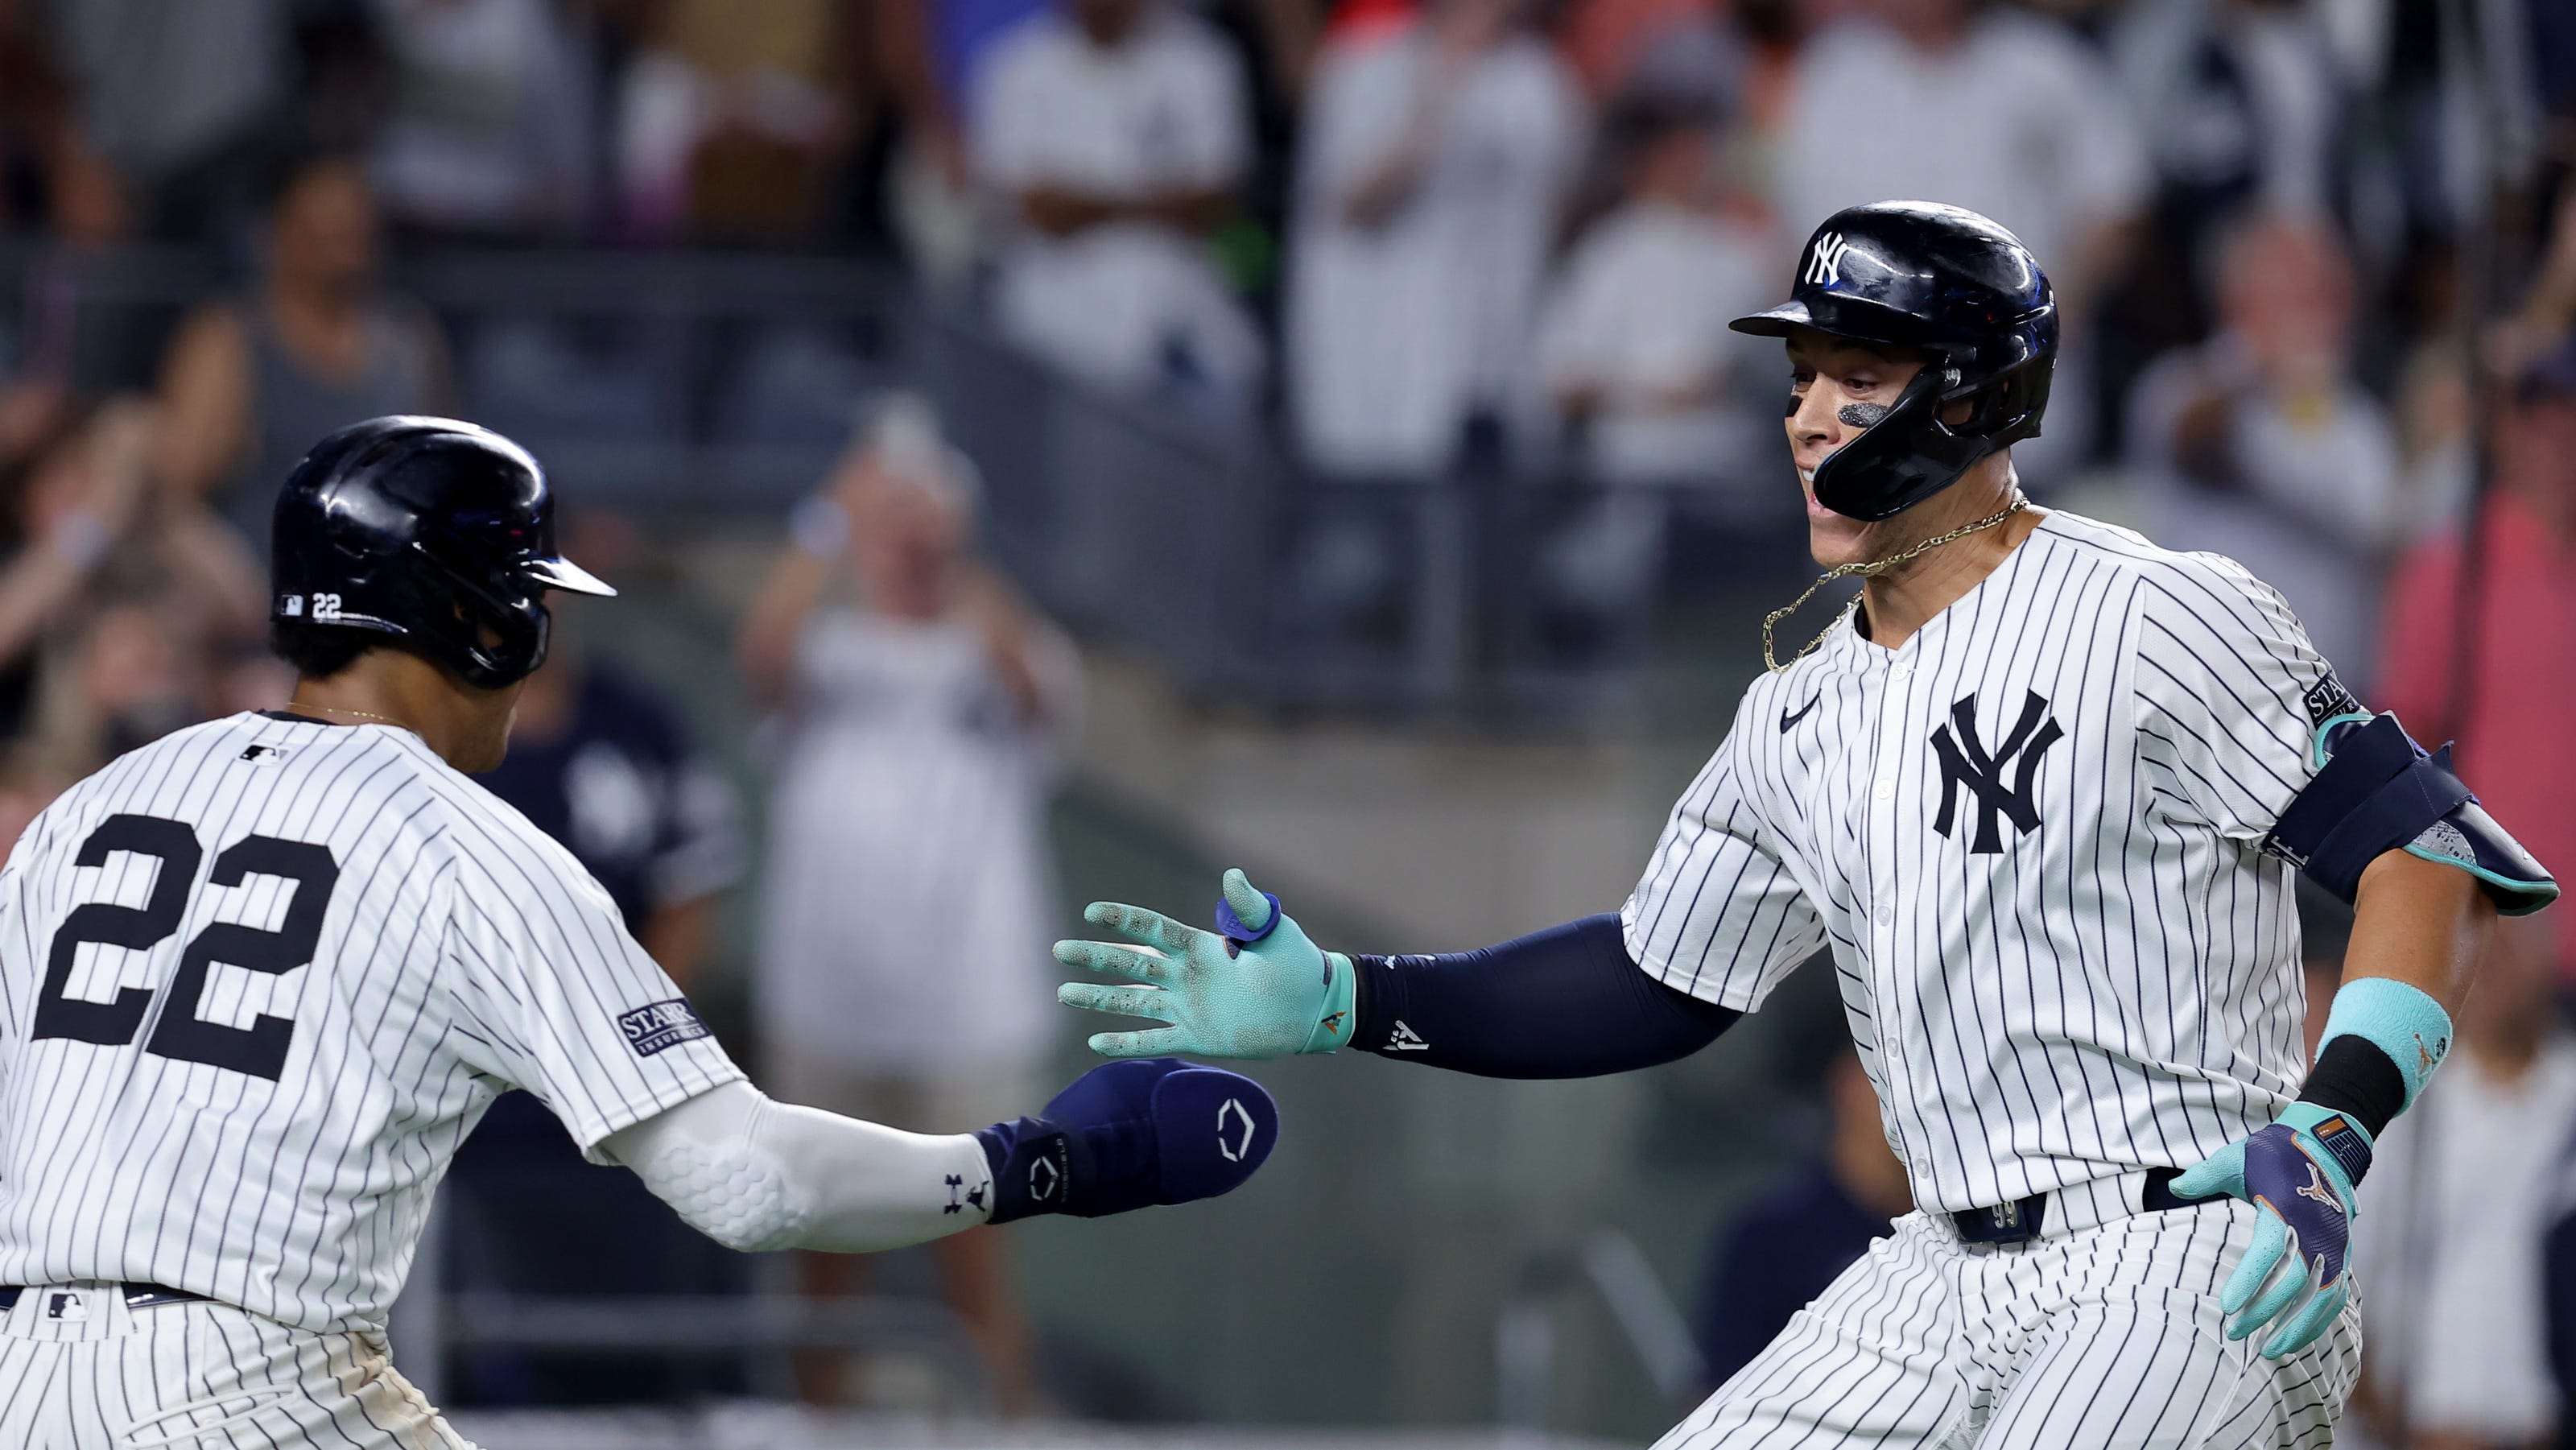 WATCH: Aaron Judge smacks one of longest HRs of his career to reach 40 on season